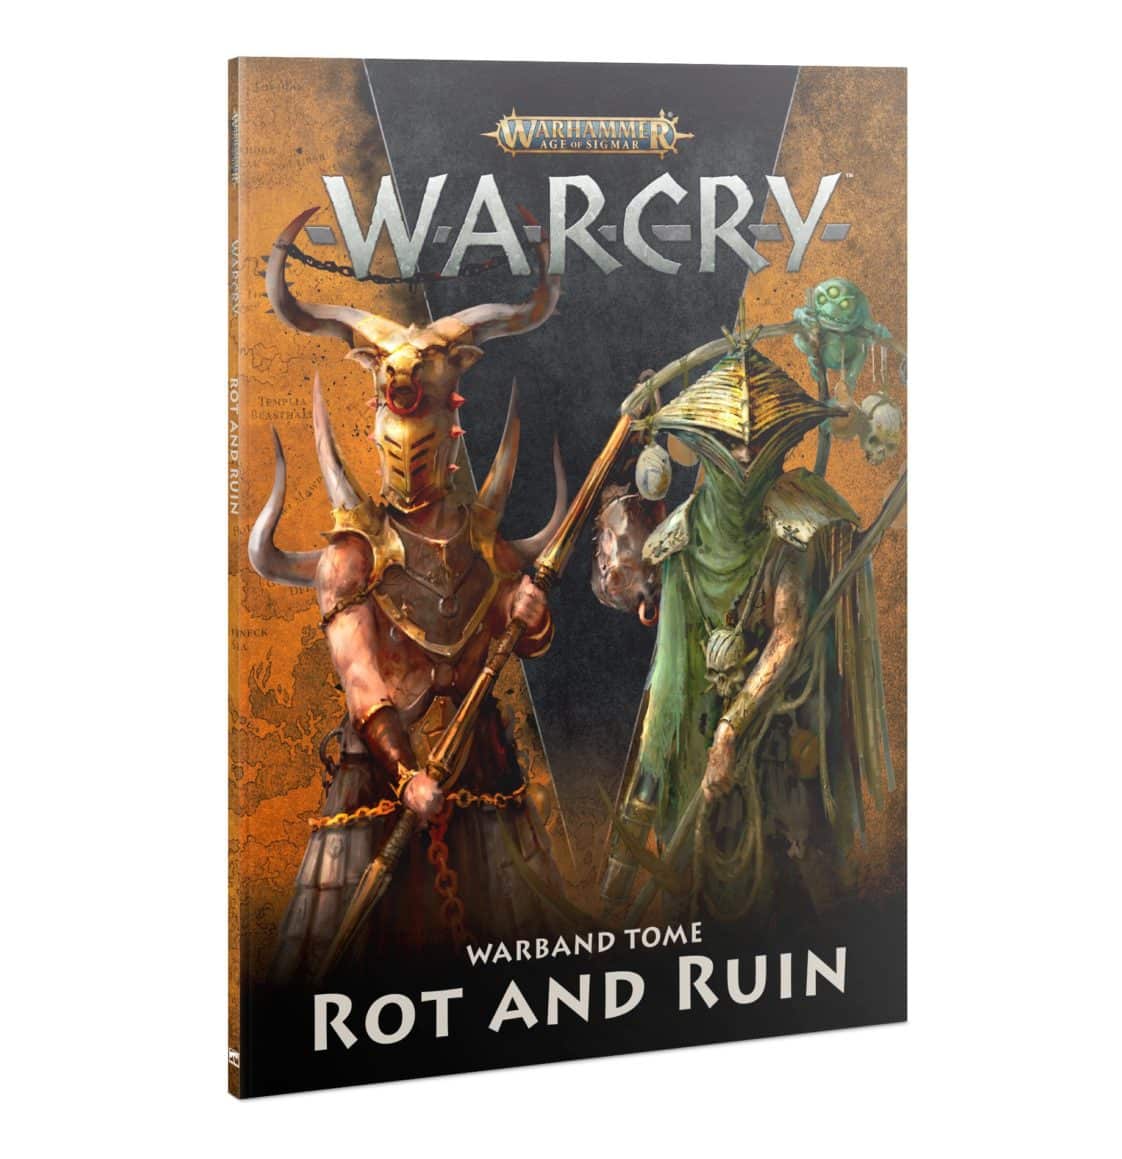 Warcry: Warband Tome - Rot and Ruin (English)